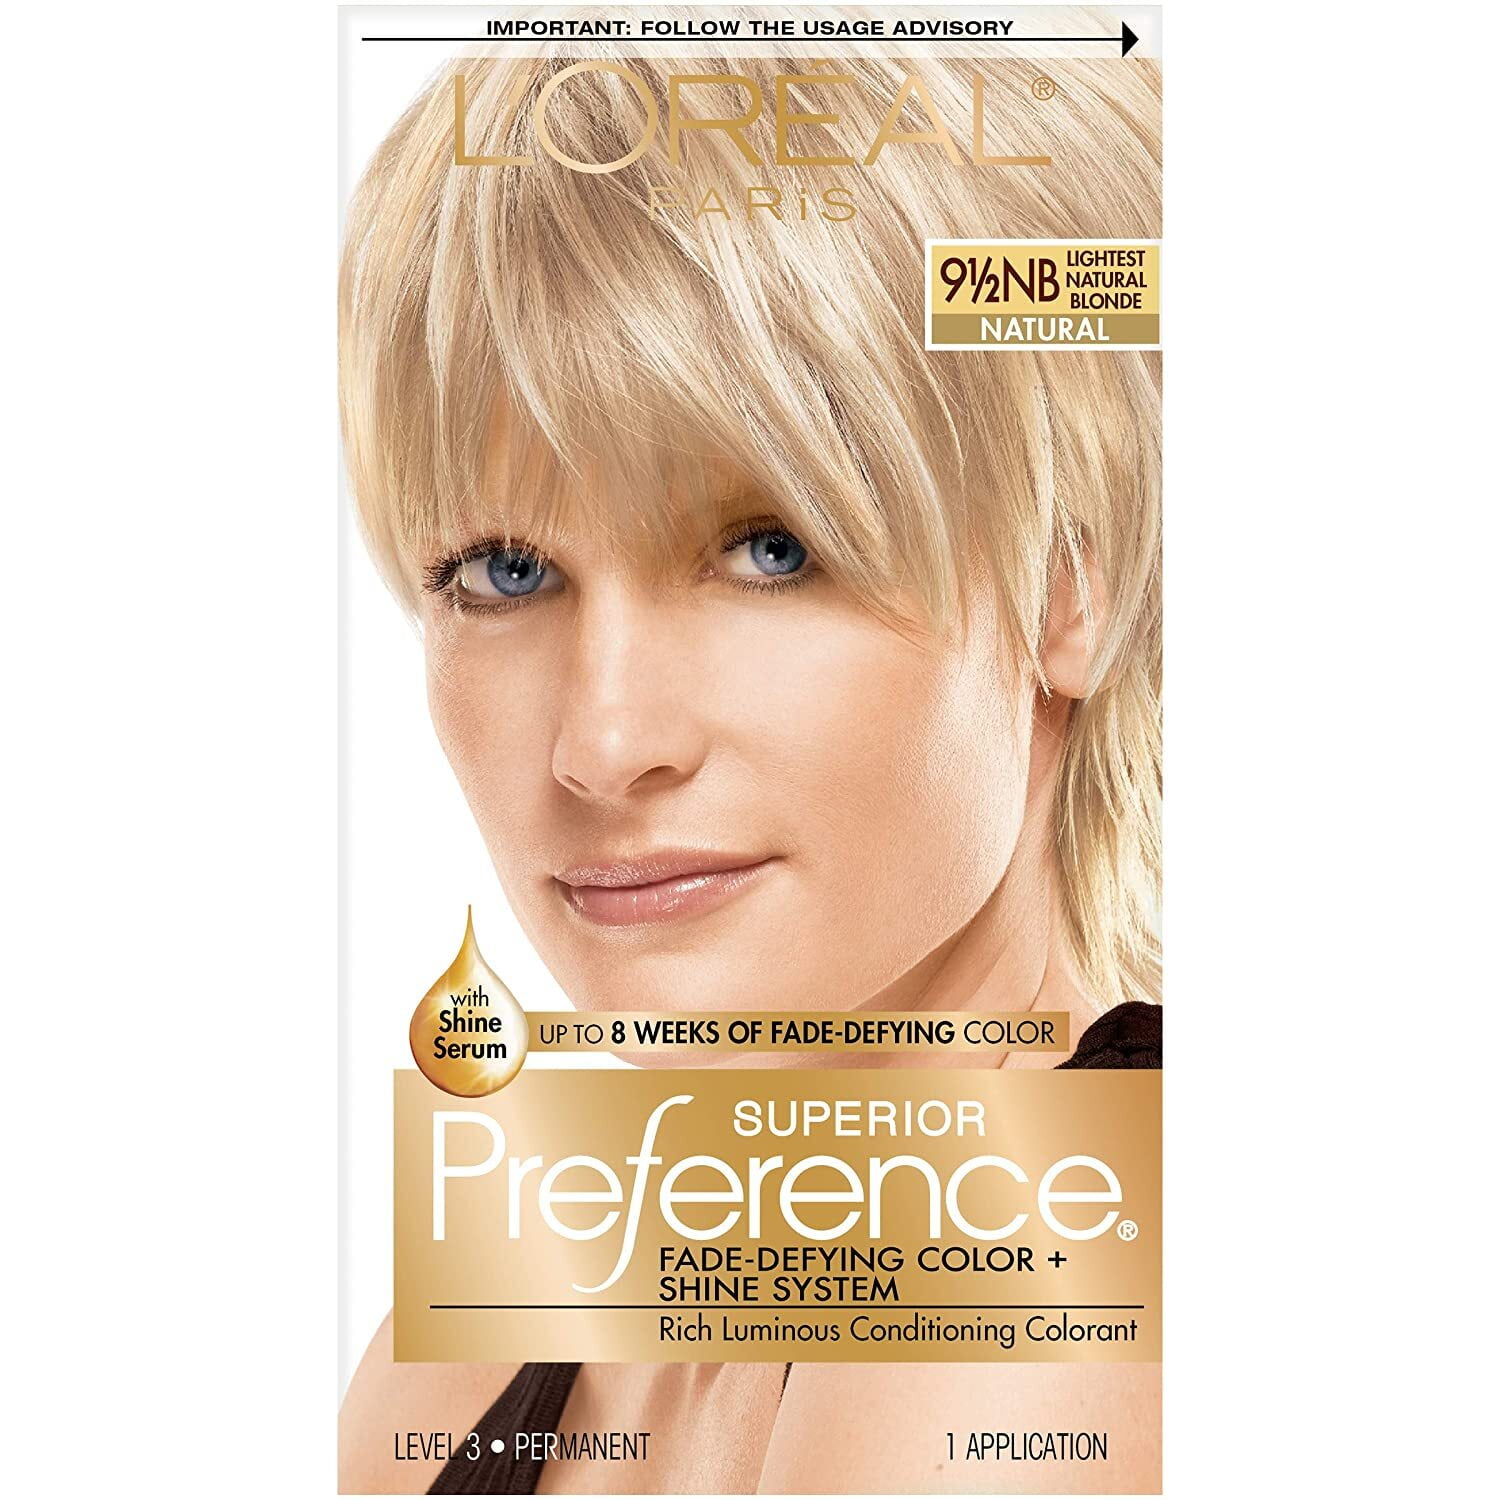 L'Oreal Paris Superior Preference Fade-Defying Shine Permanent Hair Color,   Lightest Natural Blonde, 1 Kit 